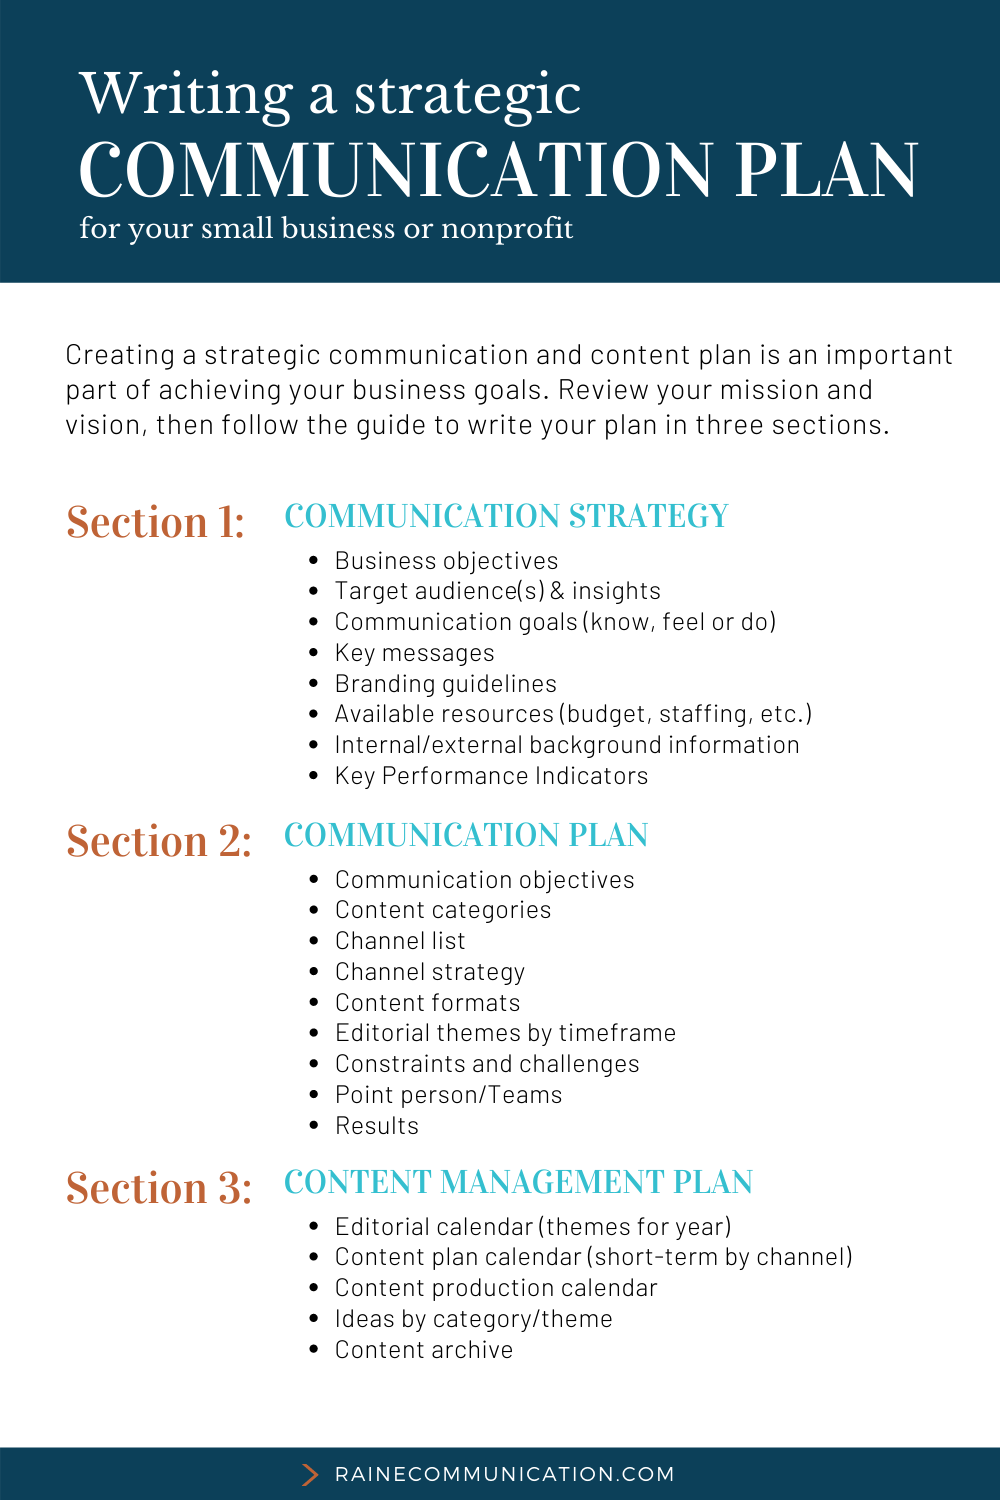 A list to help write a strategic communication plan in three sections.